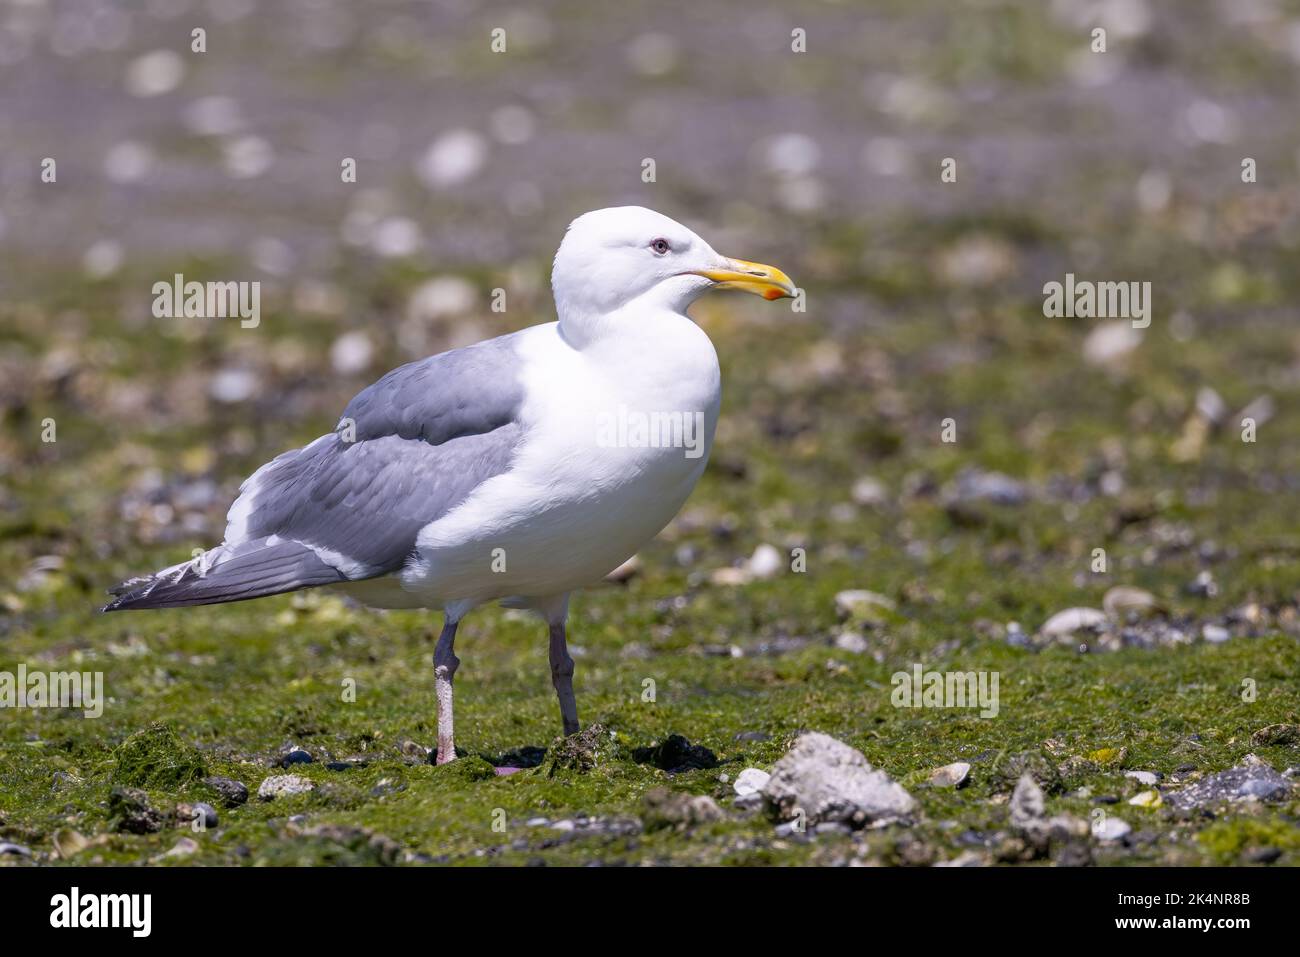 A glaucous-winged gull standing on the shore in Tracyton, Washington. Stock Photo